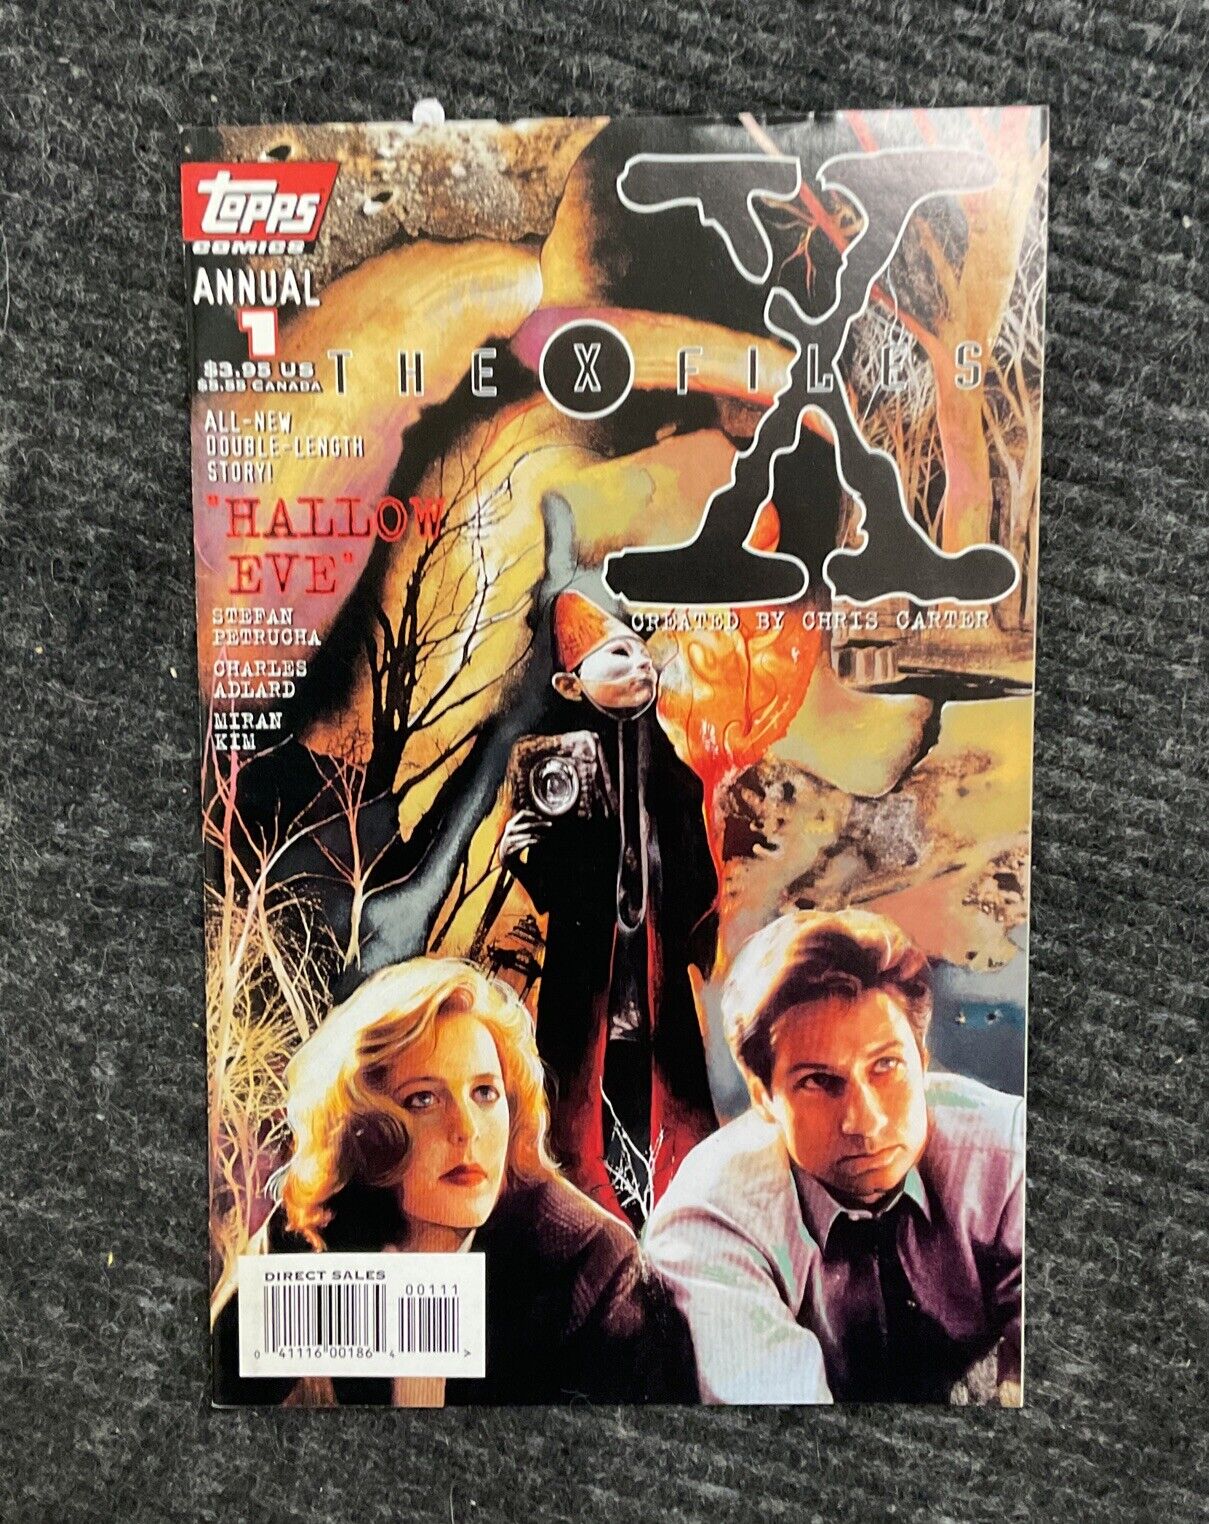 X-Files Annual #1 Topps Comic Book Vintage 1995 Chris Carter Annual Paperback